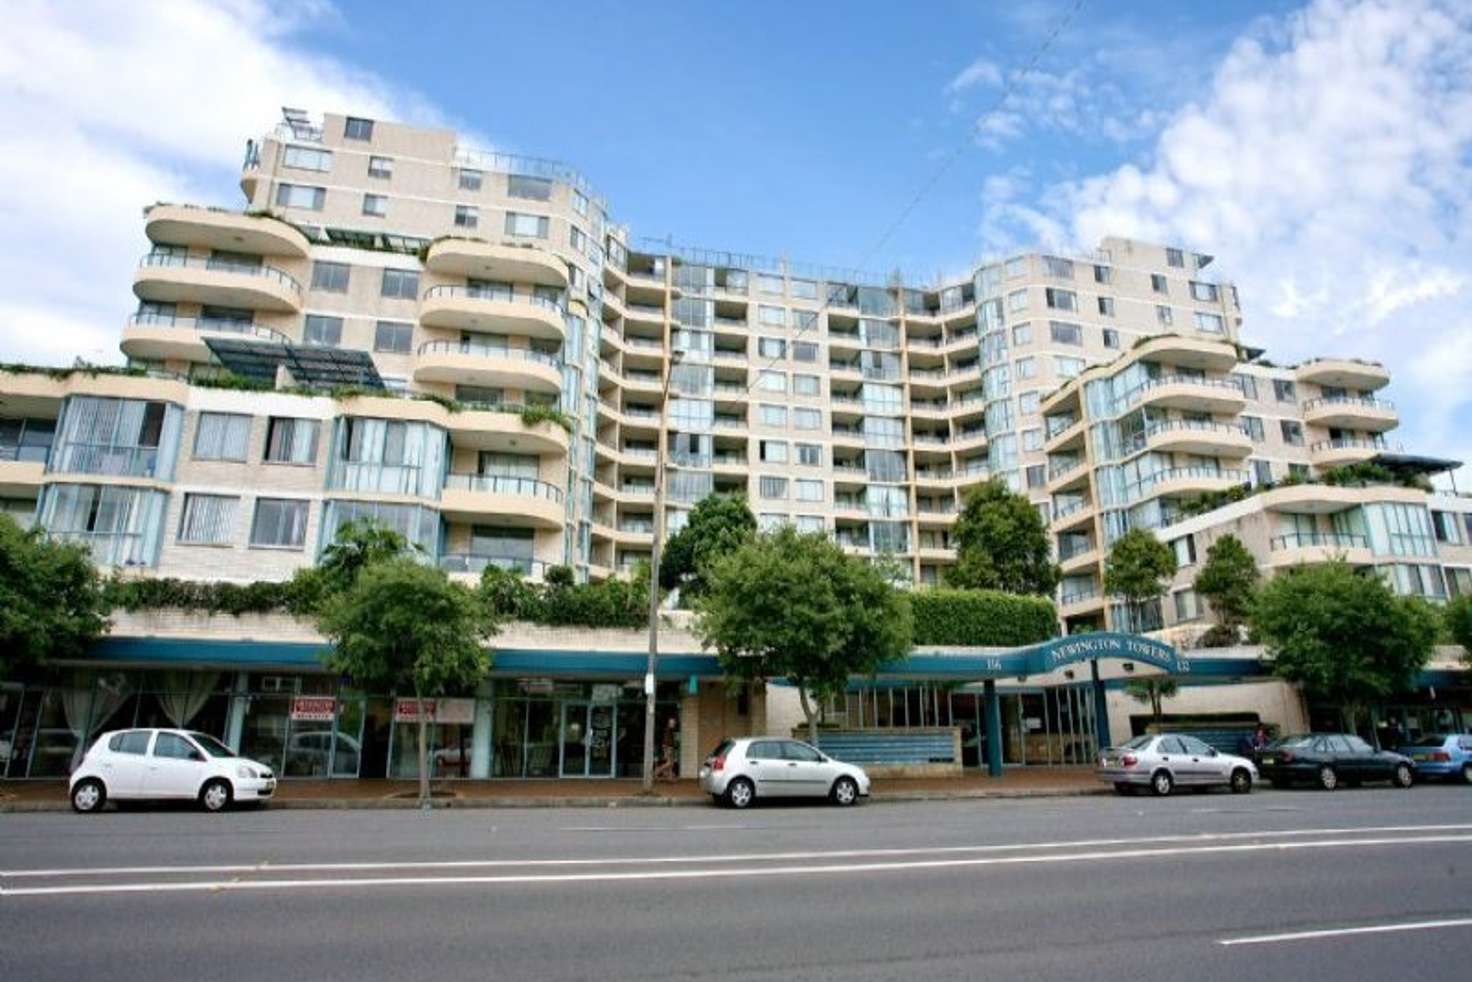 Main view of Homely apartment listing, 146/116 Maroubra Road, Maroubra NSW 2035